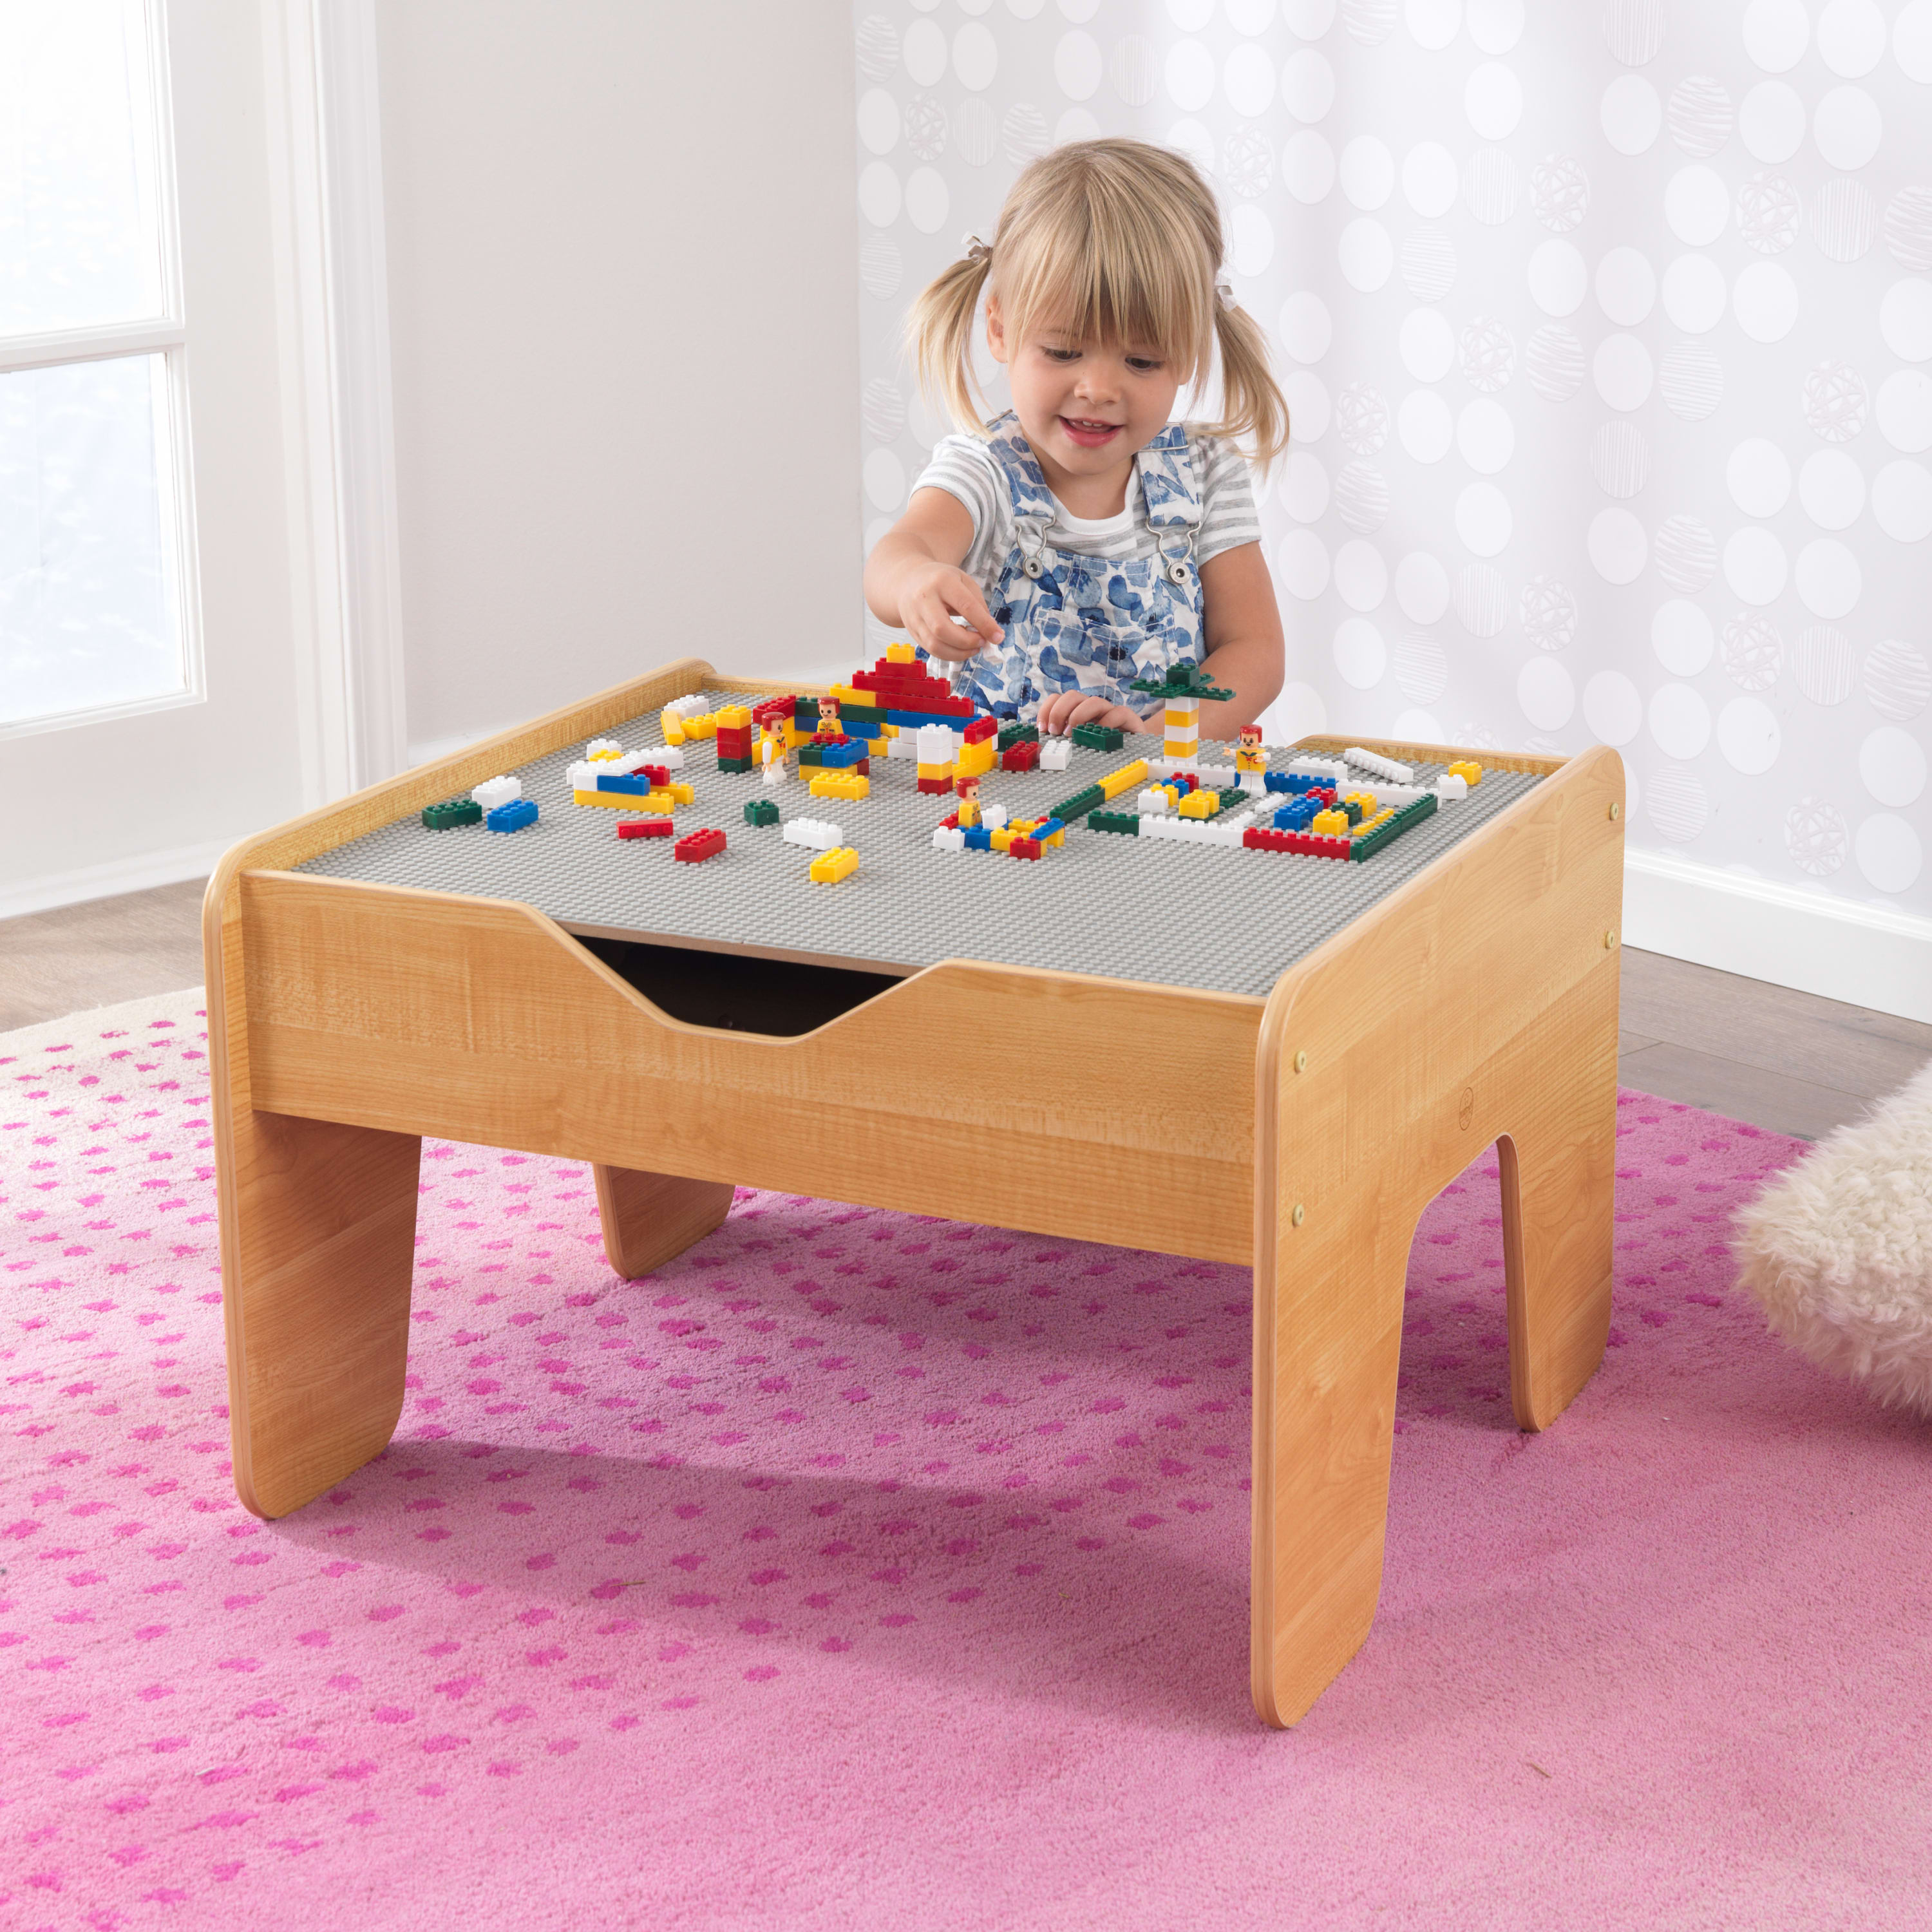 KidKraft Reversible Wooden Activity Table with 195 Building Bricks – Gray & Natural, For Ages 3+ - image 2 of 10